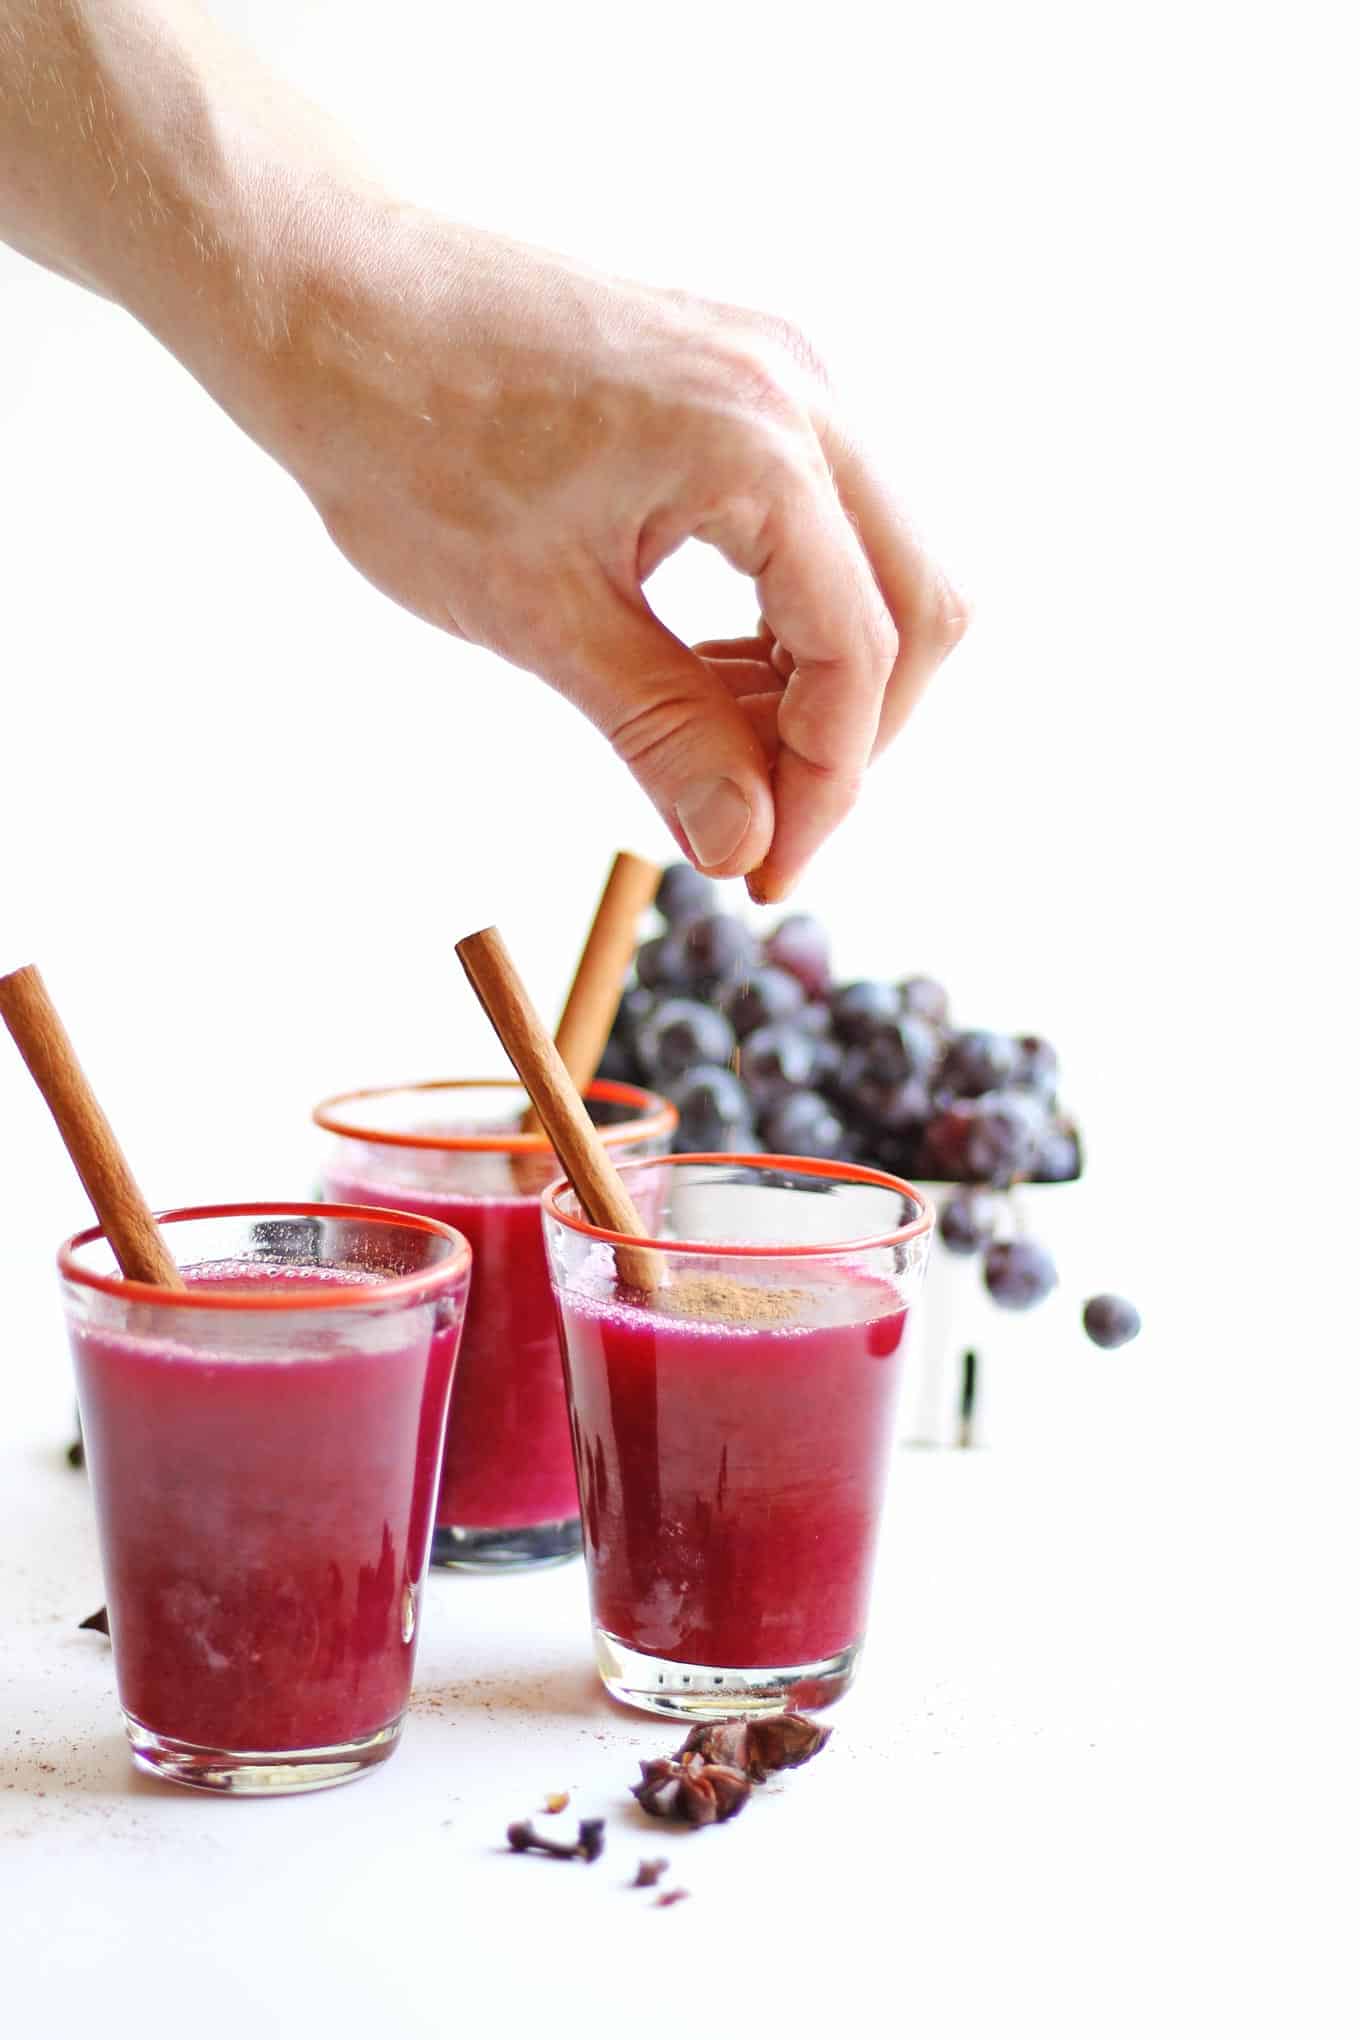 30 minute mulled concord grape cider recipe! Make a batch on your stovetop and make your house smell like fall! Sweet enough without any sugar added. The perfect drink for your fall party, or just getting cozy. Naturally vegan and refined sugar free. // Rhubarbarians #grapecider #falldrink